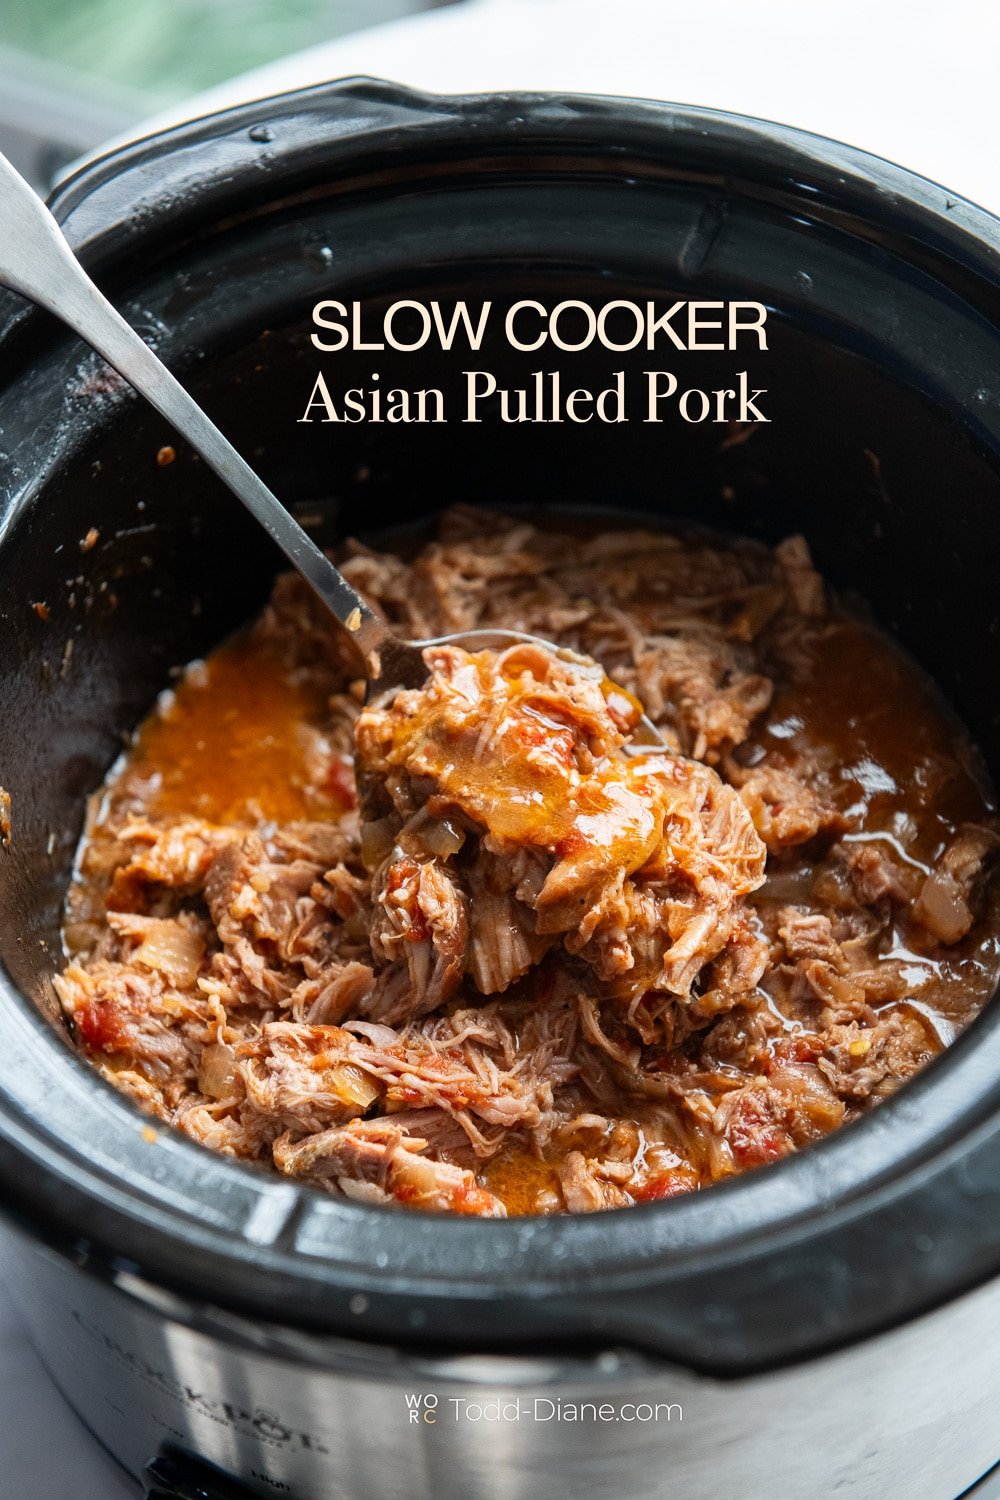 Slow Cooker Archives - Page 5 of 13 - The Seasoned Mom